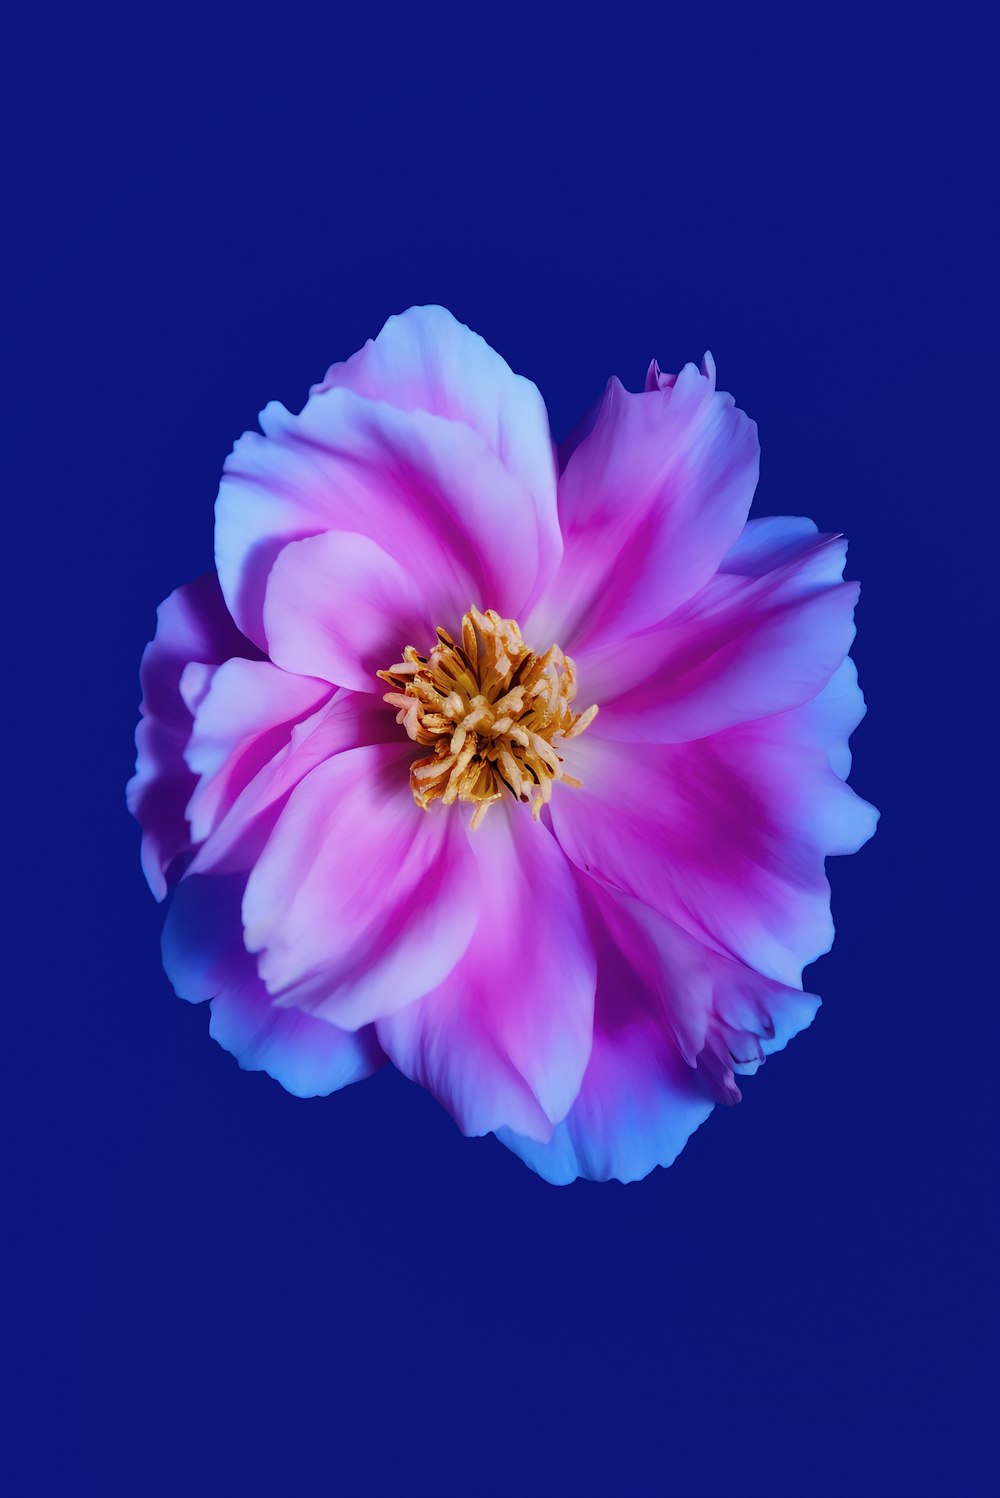 a pink flower with a yellow center on a blue background